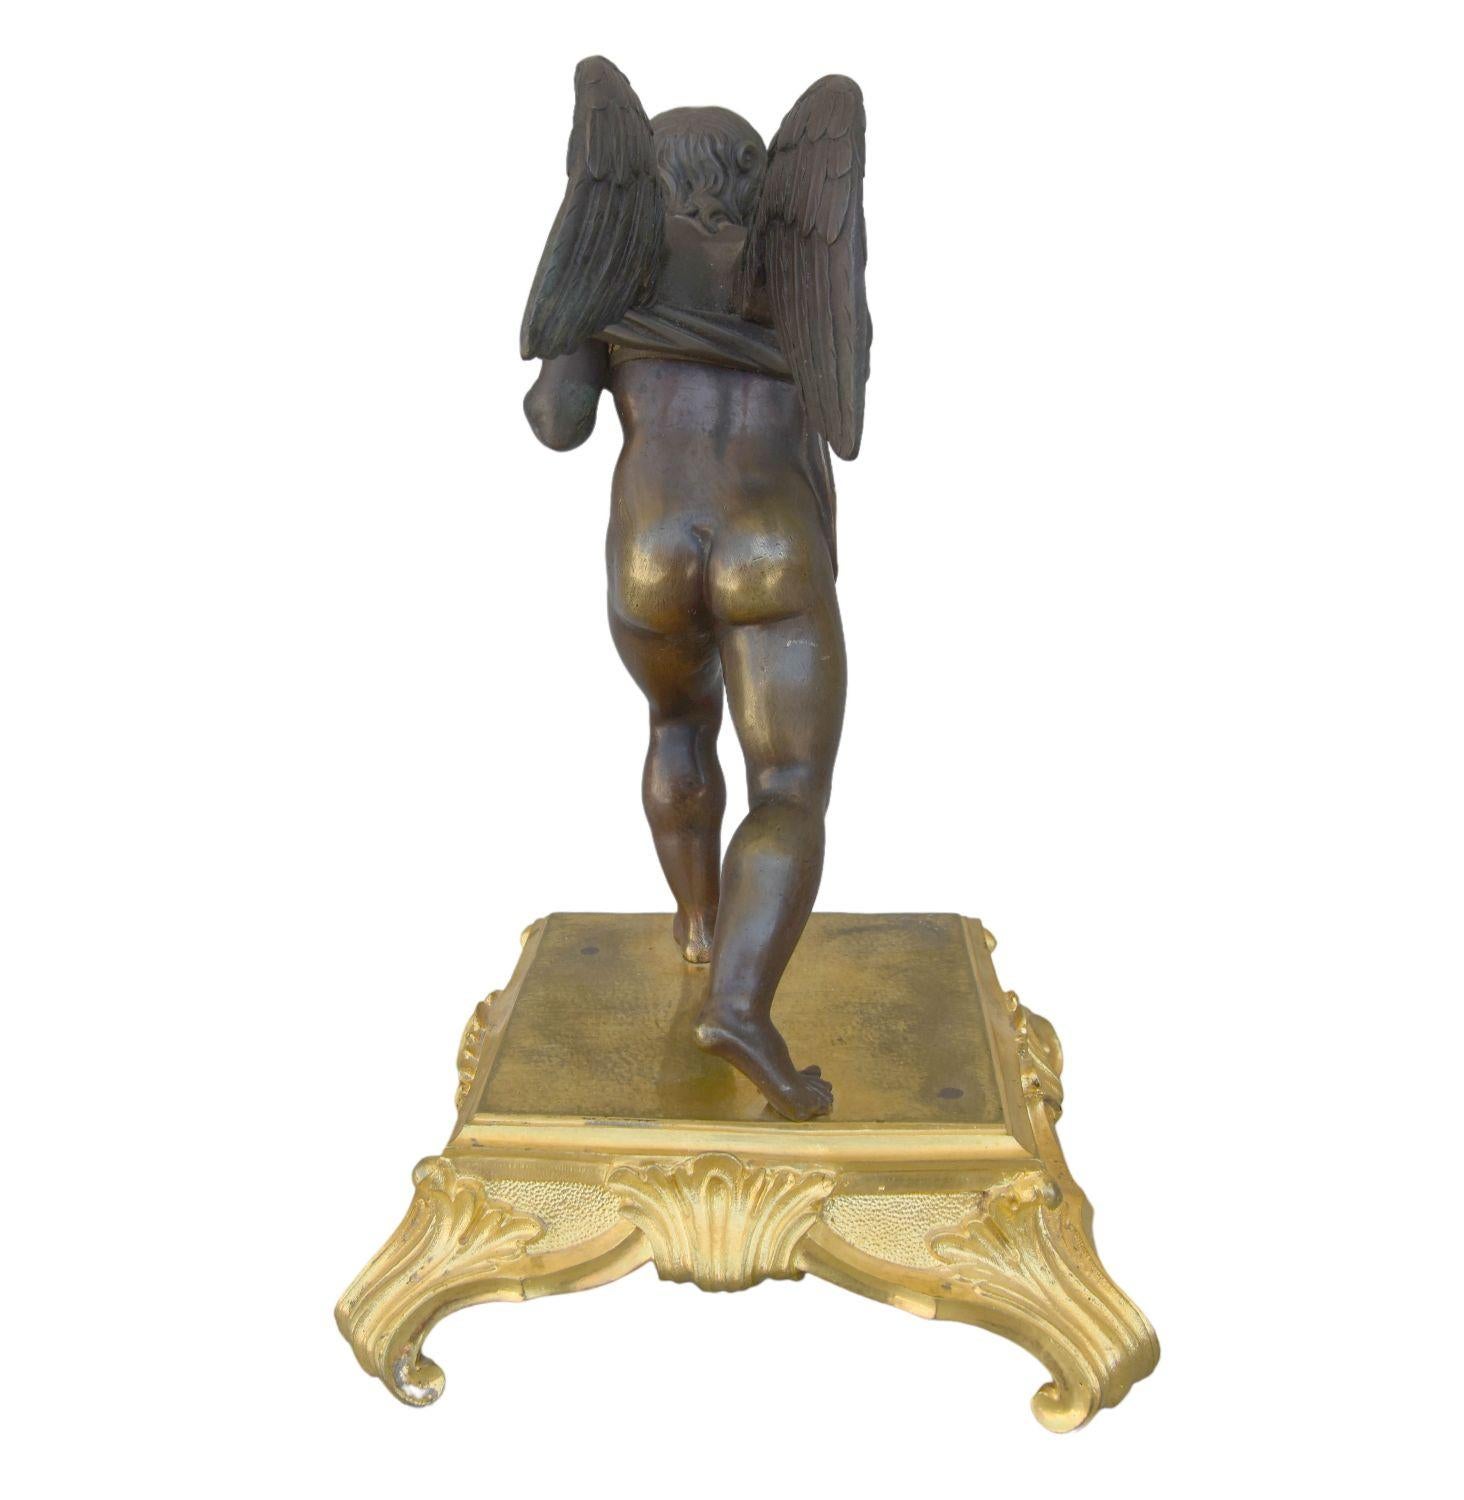 Blind love bronze 19th century symbolized by a cupid seeming to play hackney jersey with brown patina on gilded bronze base. Note a difference in patina between the upper part and the lower part of the angel. Height dimension 25 cm for a size of 20